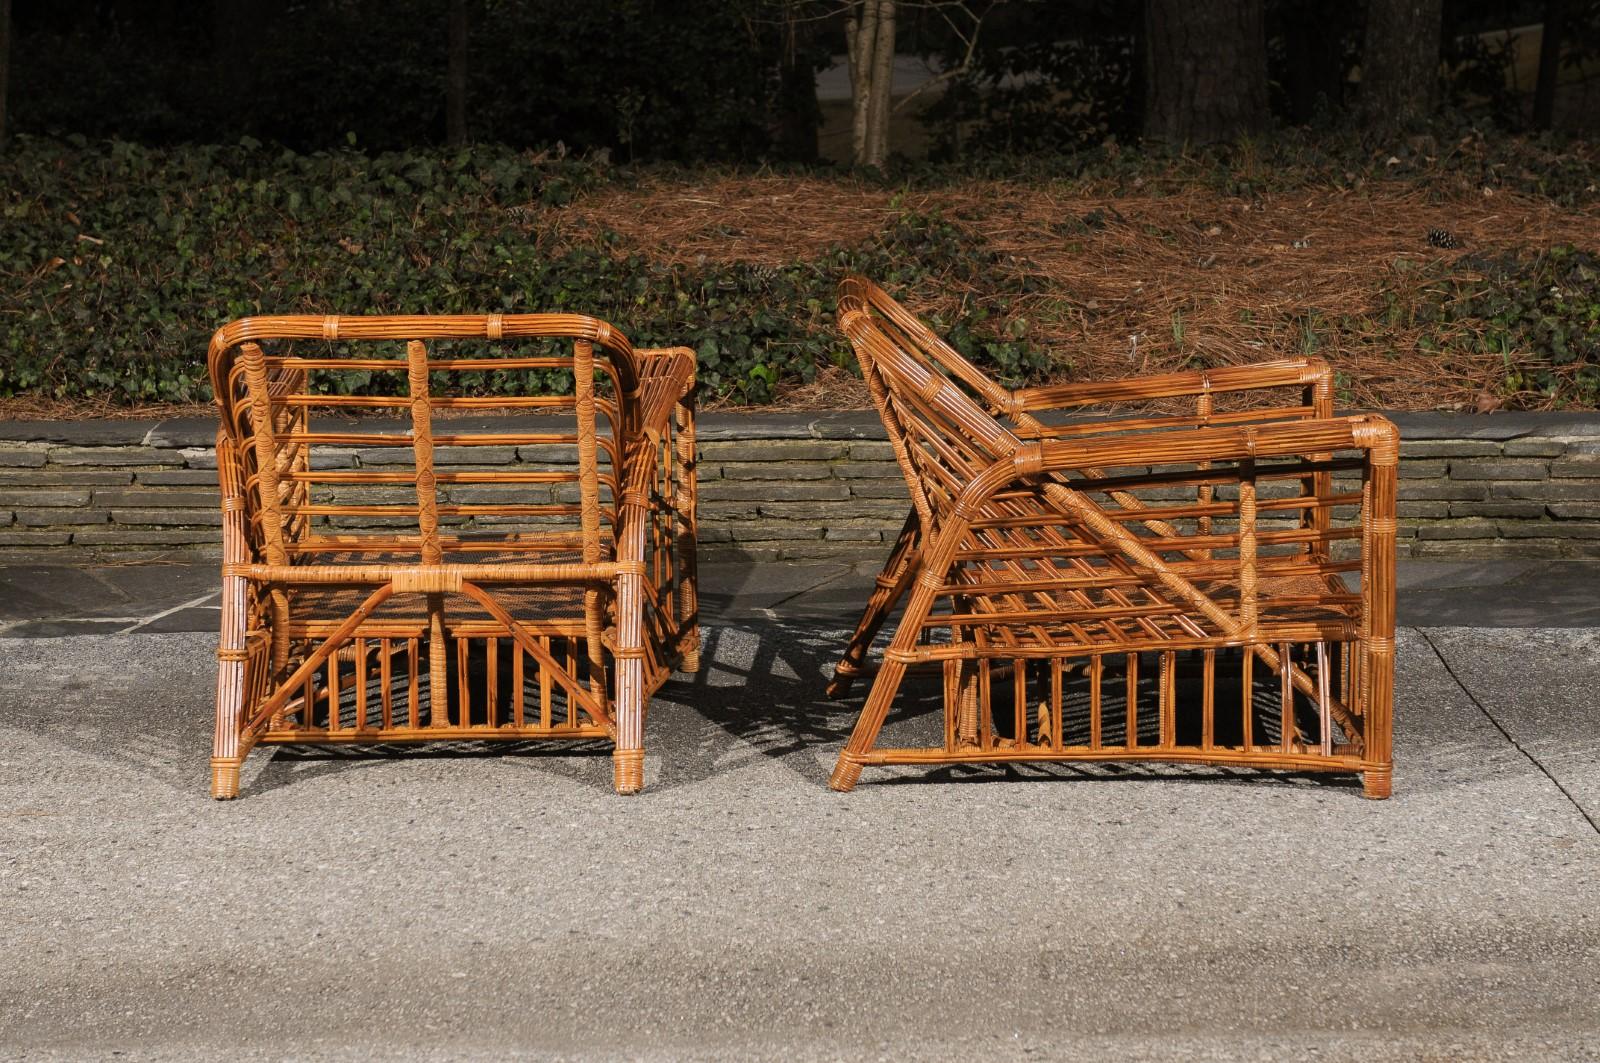 Exquisite Restored Pair of Modern President's Loungers by McGuire, circa 1985 For Sale 3